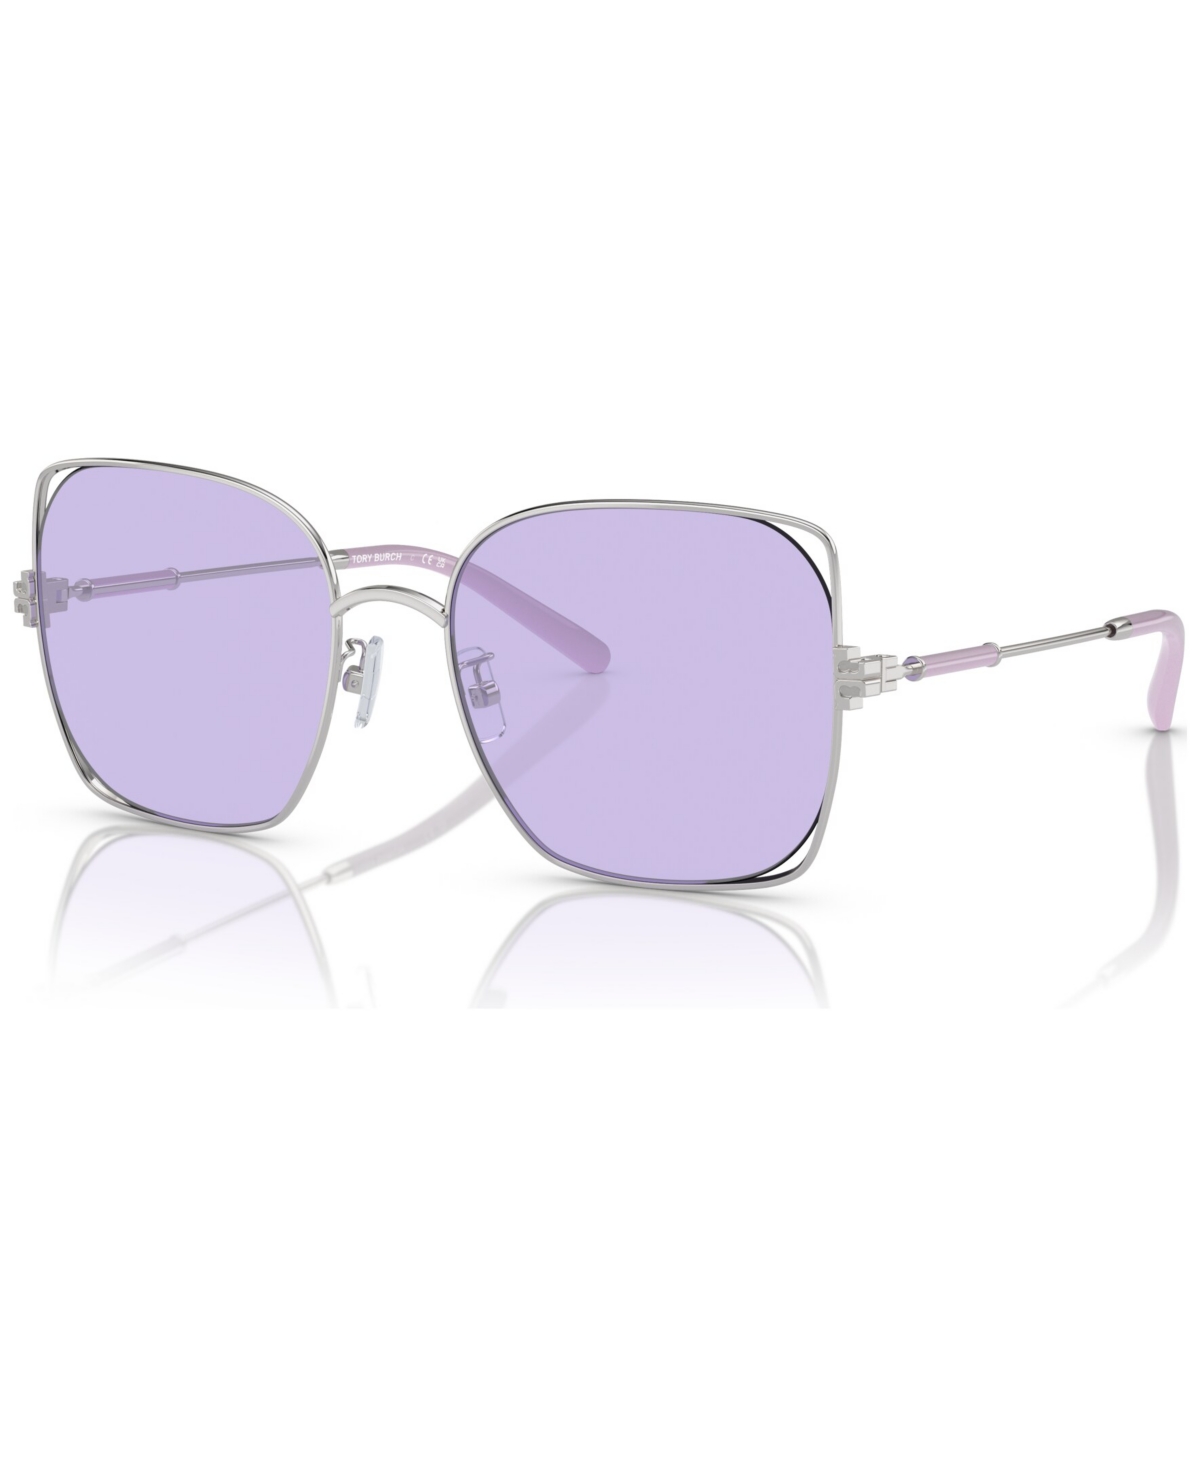 Women's Sunglasses, TY6097 - Silver/Violet Solid